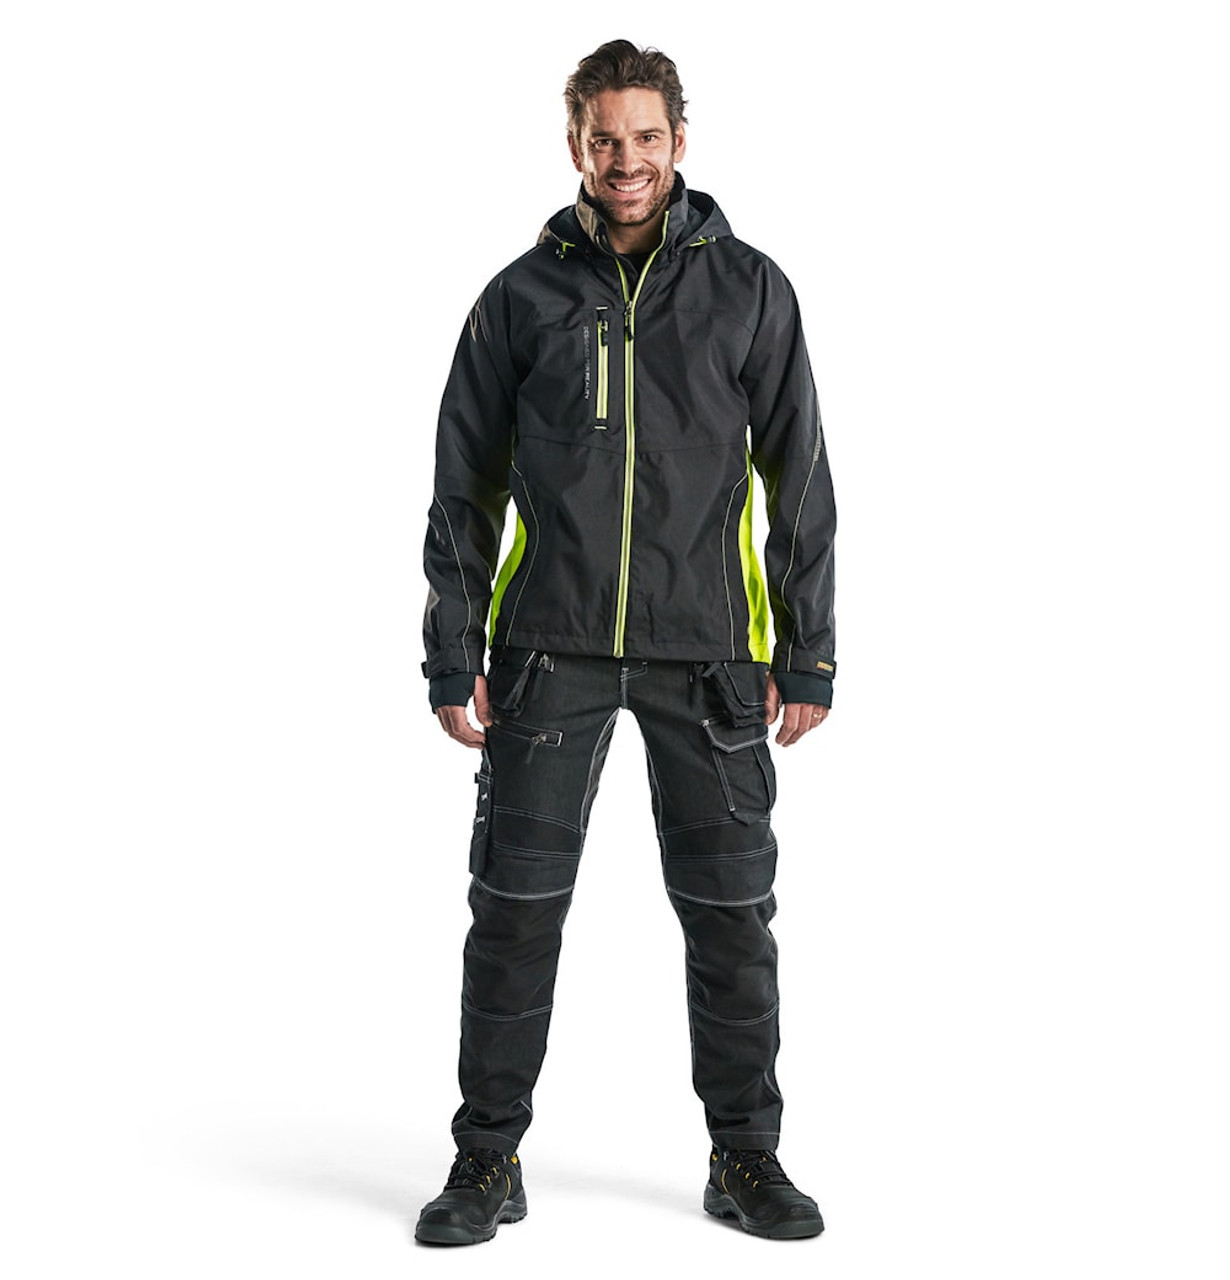 BLAKLADER Jacket  4790  with  for BLAKLADER Jacket  | 4790 Mens Black / Yellow Full Zip Shell Jacket in Polyester Waterproof that have Full Zip  available in Australia and New Zealand